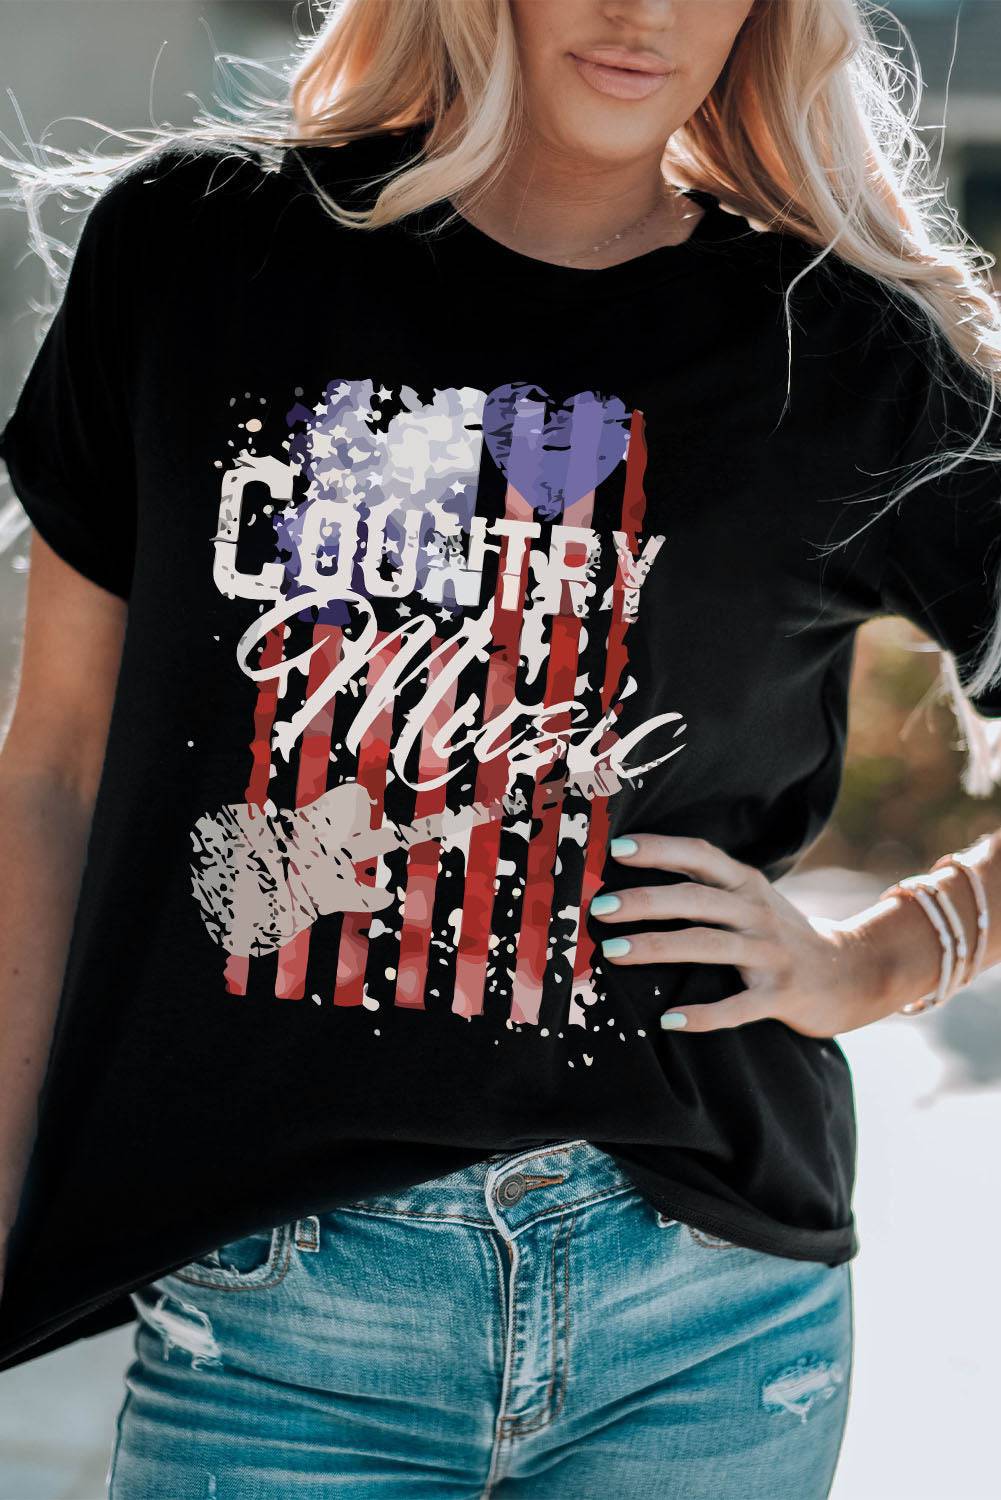 Country Music Graphic Tee Shirt - Feel the Heartland Rhythm and Look Effortlessly Chic - Embrace Romance in Style - Guy Christopher